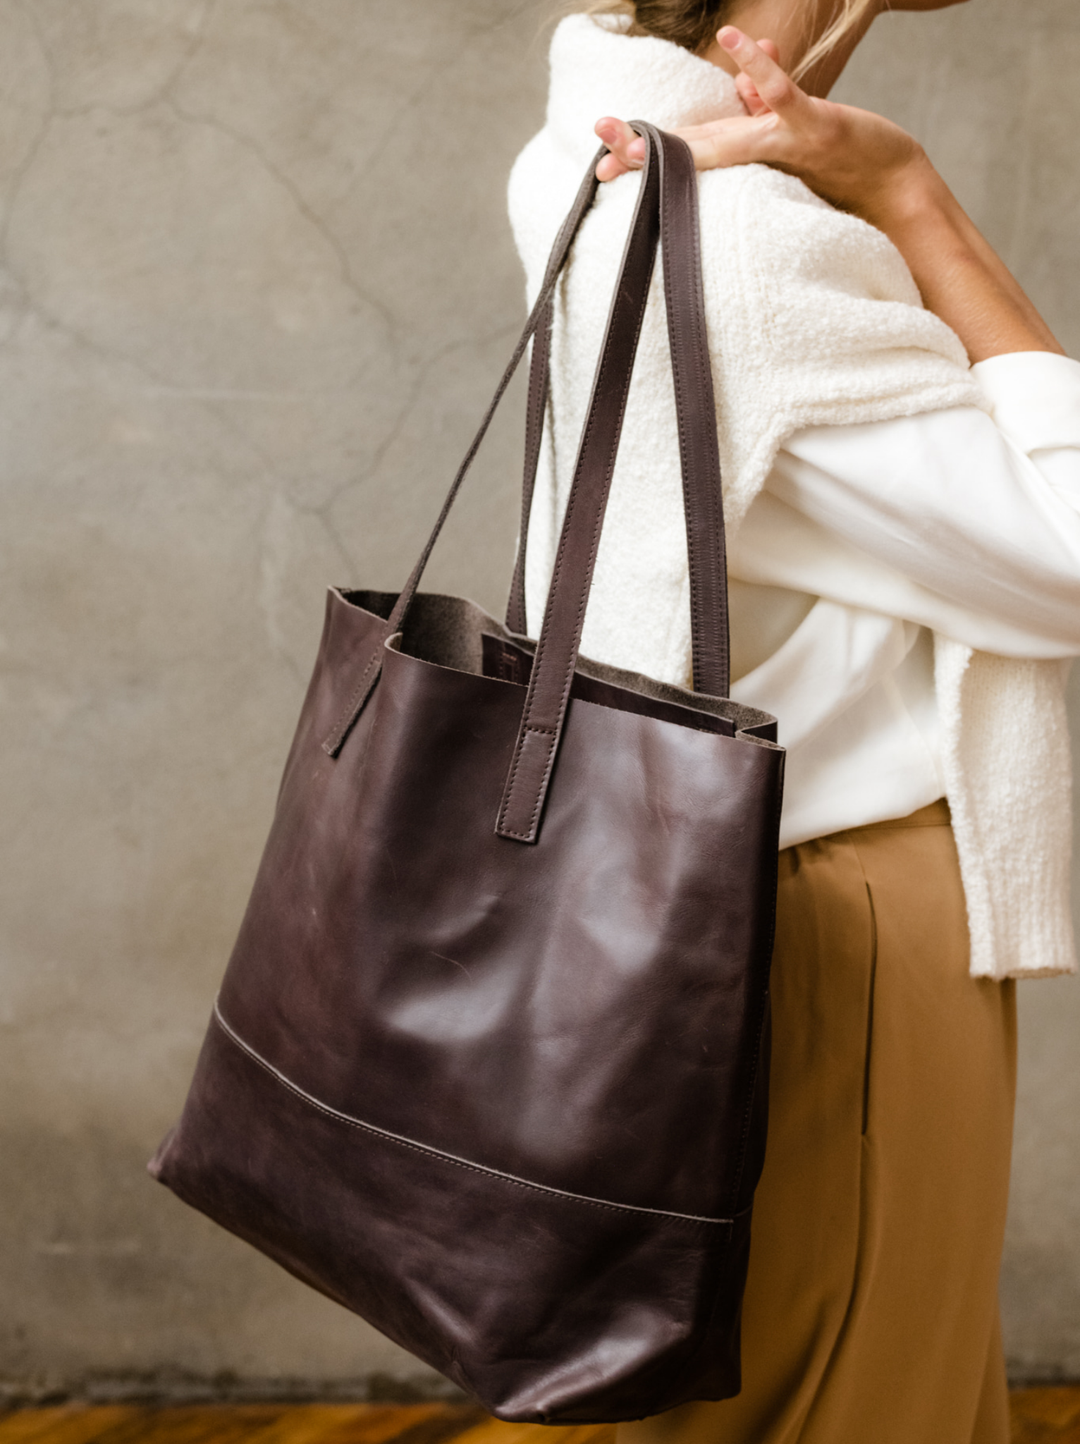 Work bags men will love for the office, commuting and more - Good Morning  America